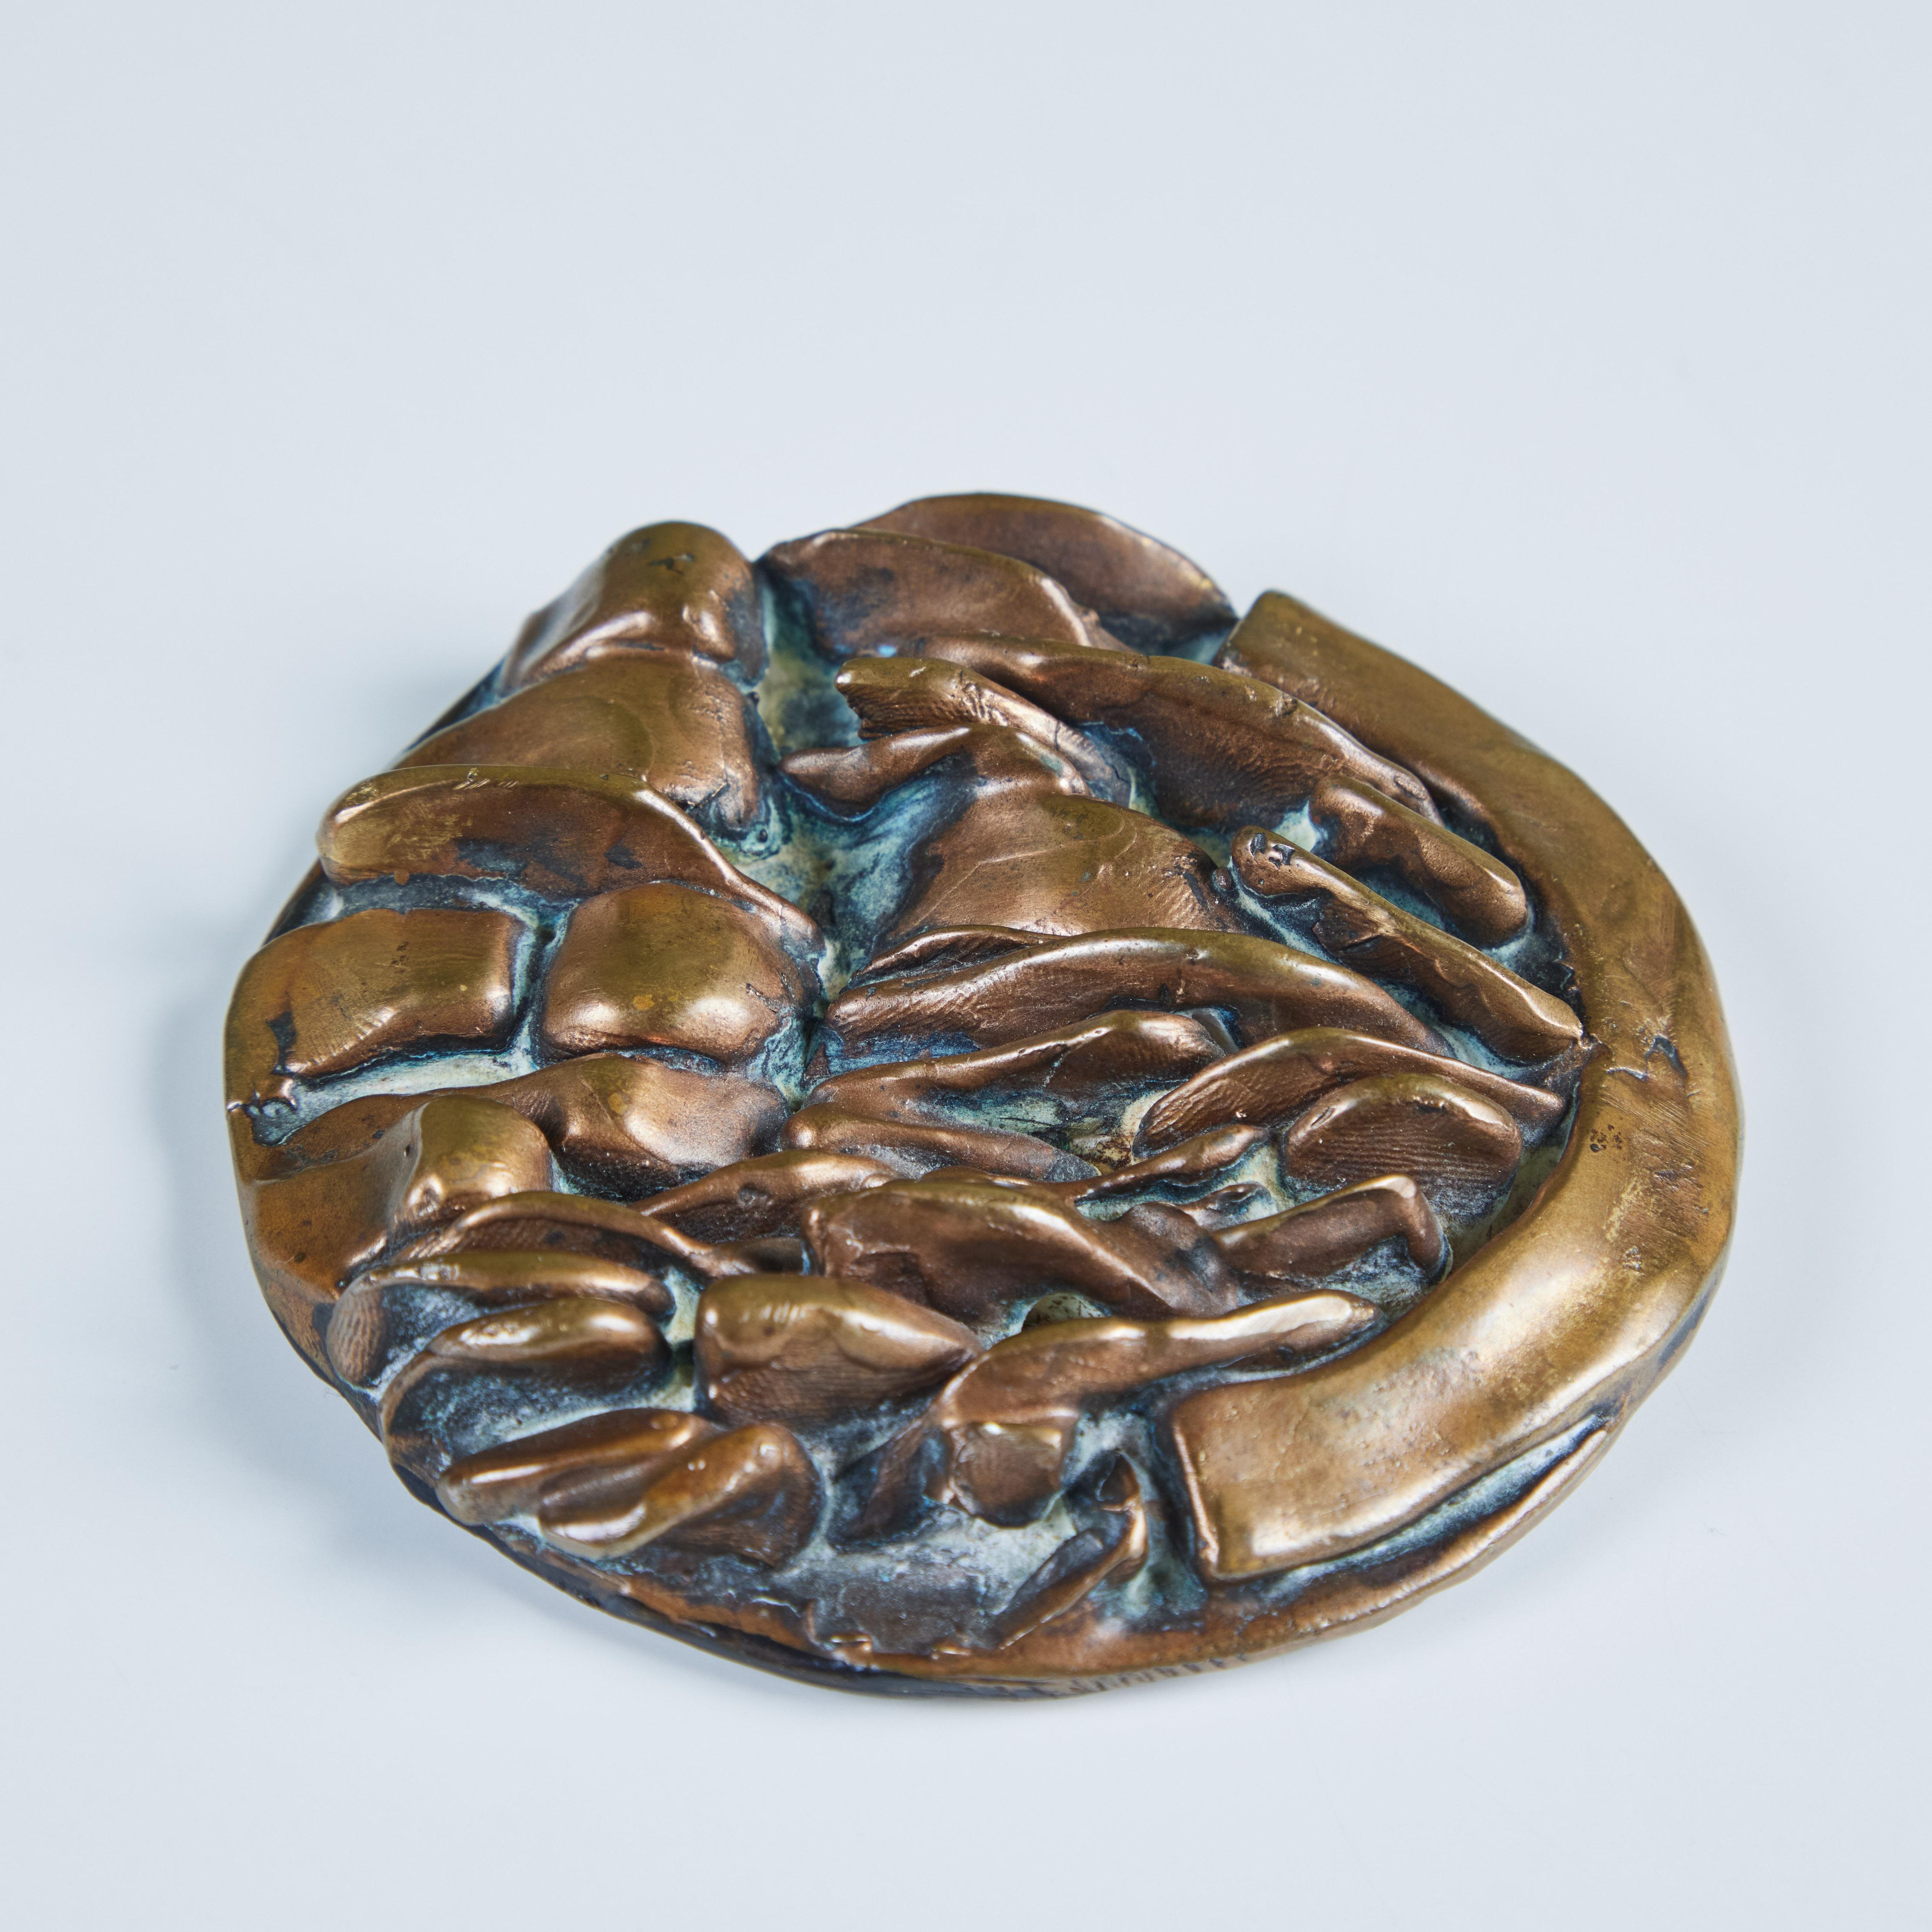 Bronze decorative medallion or paperweight by sculptor Riccardo Cassini, c.1979, Italy. This circular bronze piece showcases varying abstract bronze texture along the top of the piece.  It would be great as an office paperweight or decorative